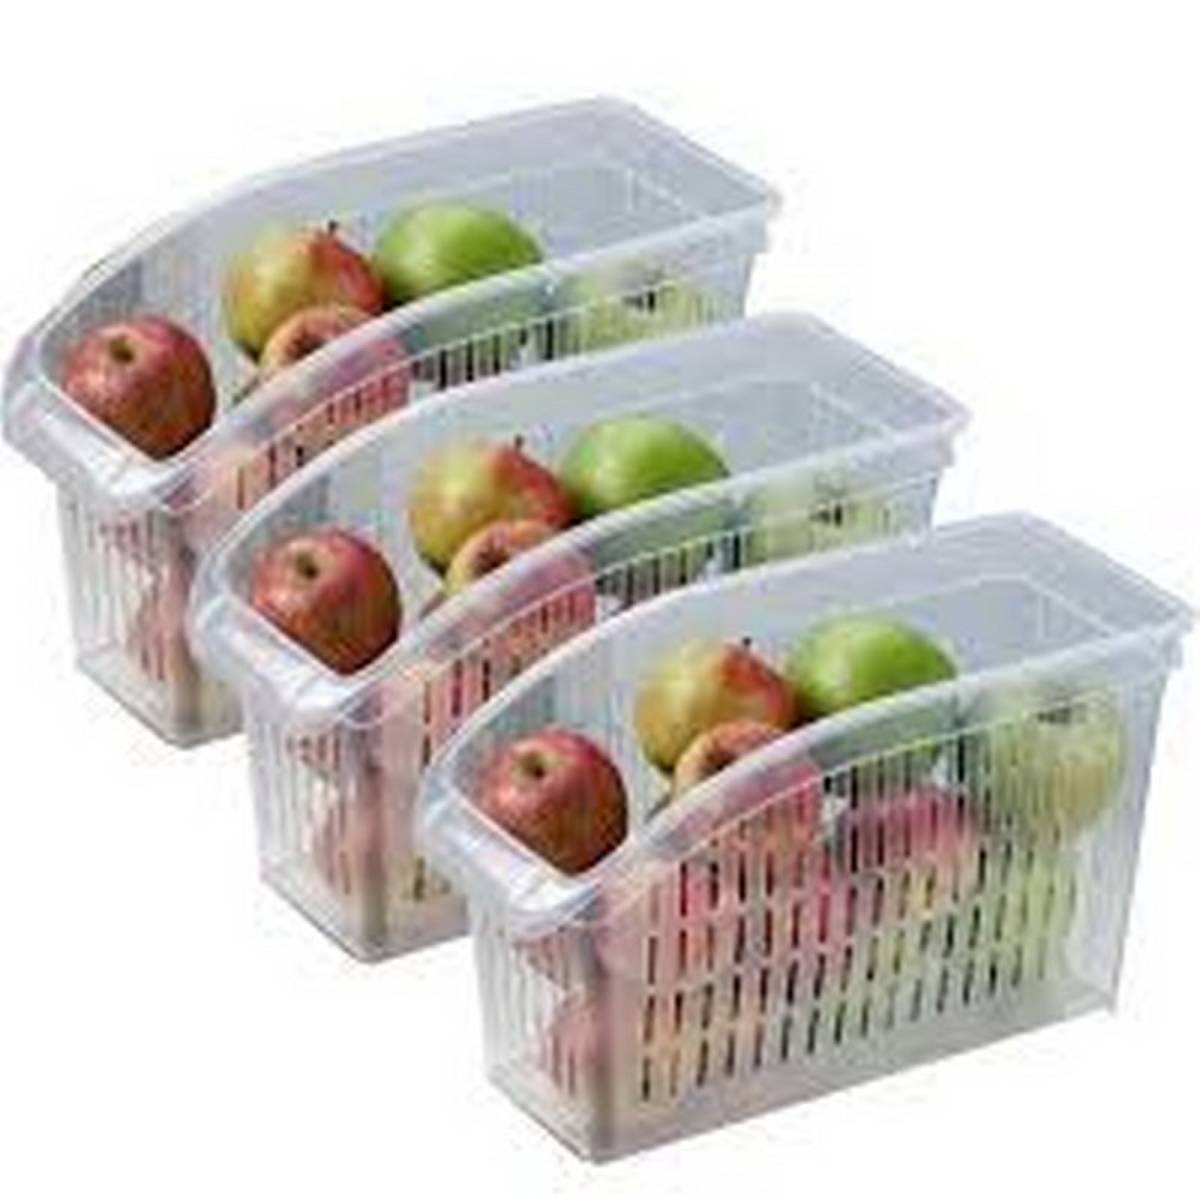 Pack Of 2 Fridge Plastic Hollow Out Design Vegetables Fruits Storage Box Container Kitchen Bathroom Laundry & Balcony Storage Basket